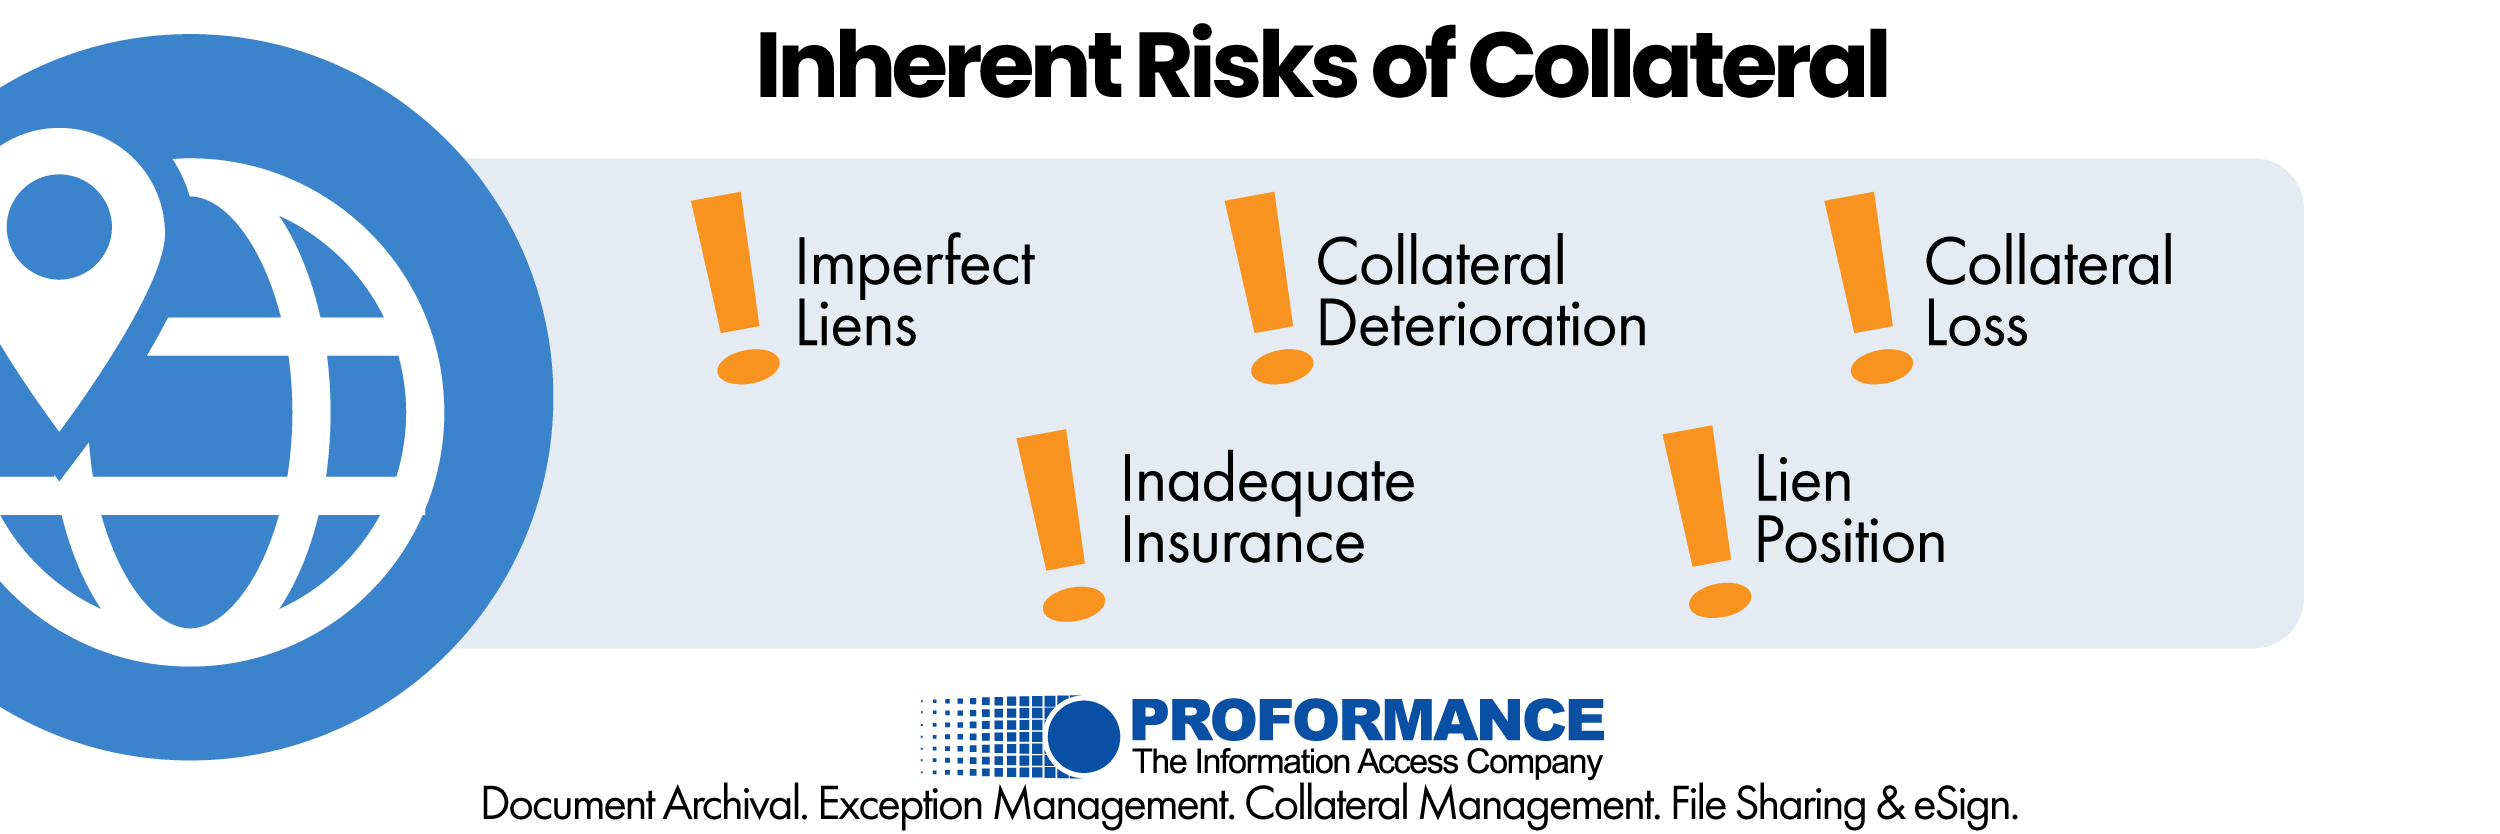 inherent risks of collateral-01